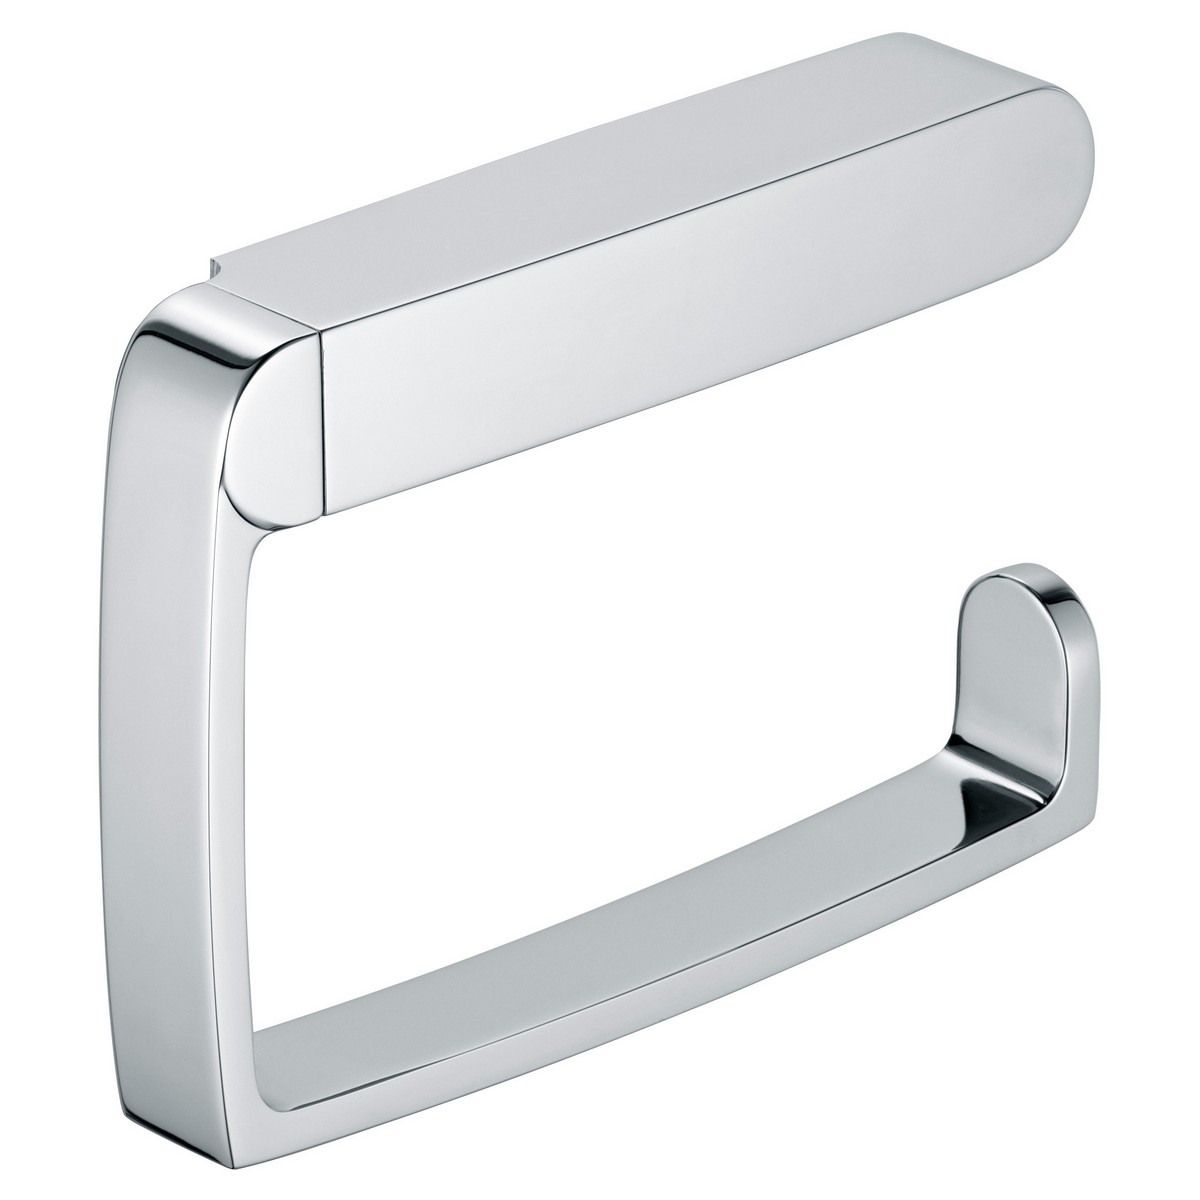 KEUCO 11662010000 ELEGANCE 5 1/2 INCH WALL MOUNTED TOILET PAPER HOLDER IN POLISHED CHROME